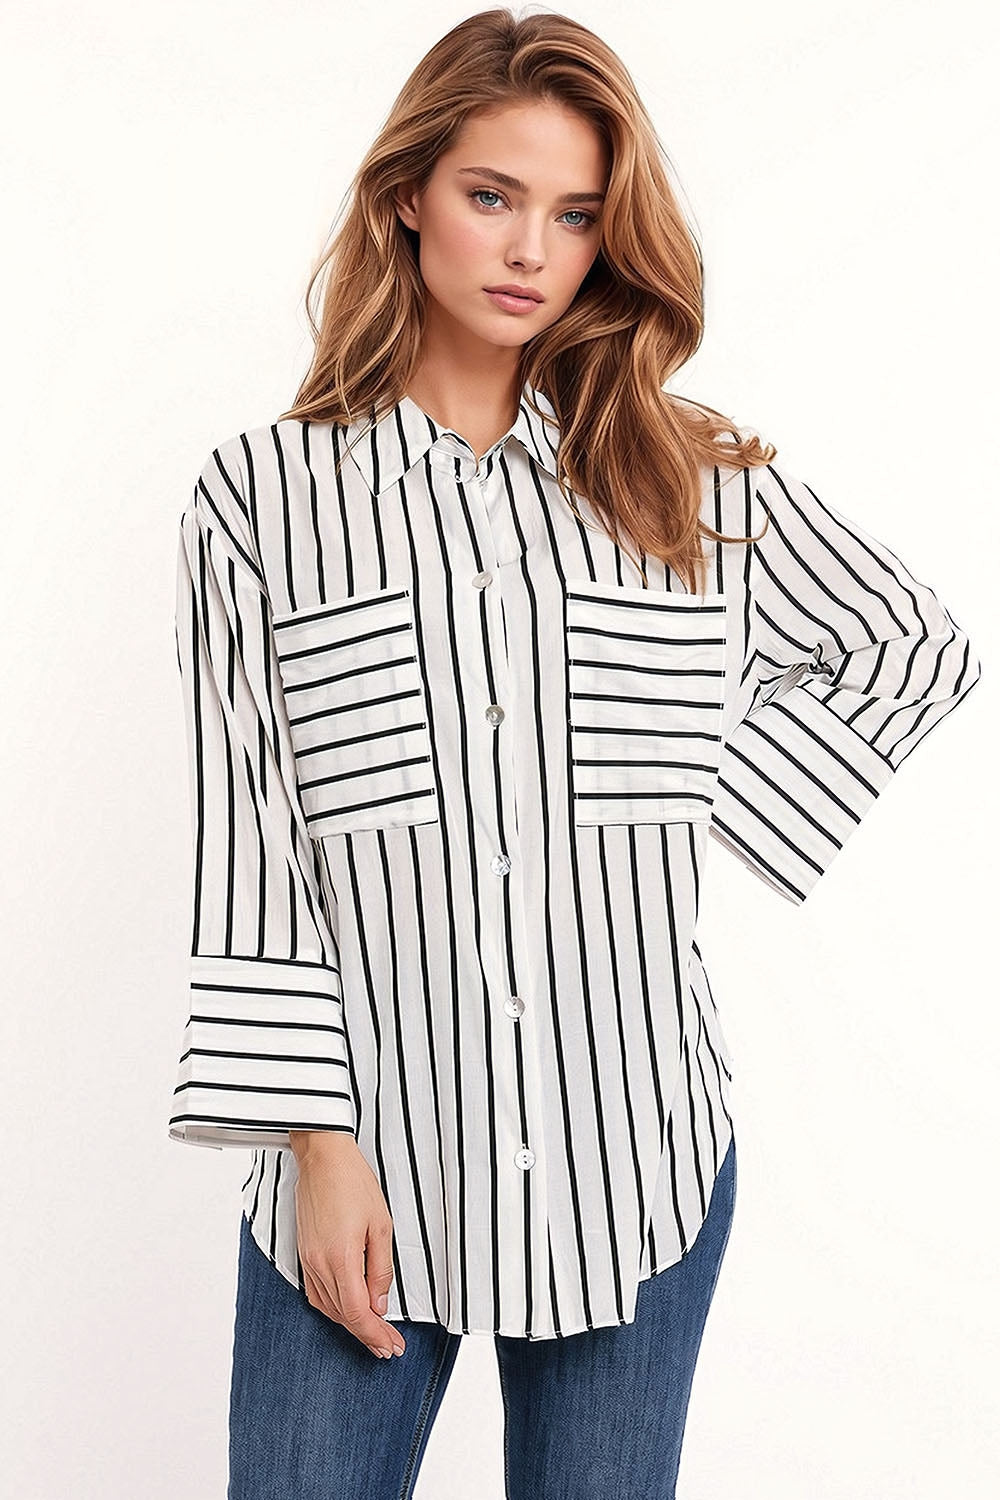 Q2 White shirt with black stripes and chest pockets